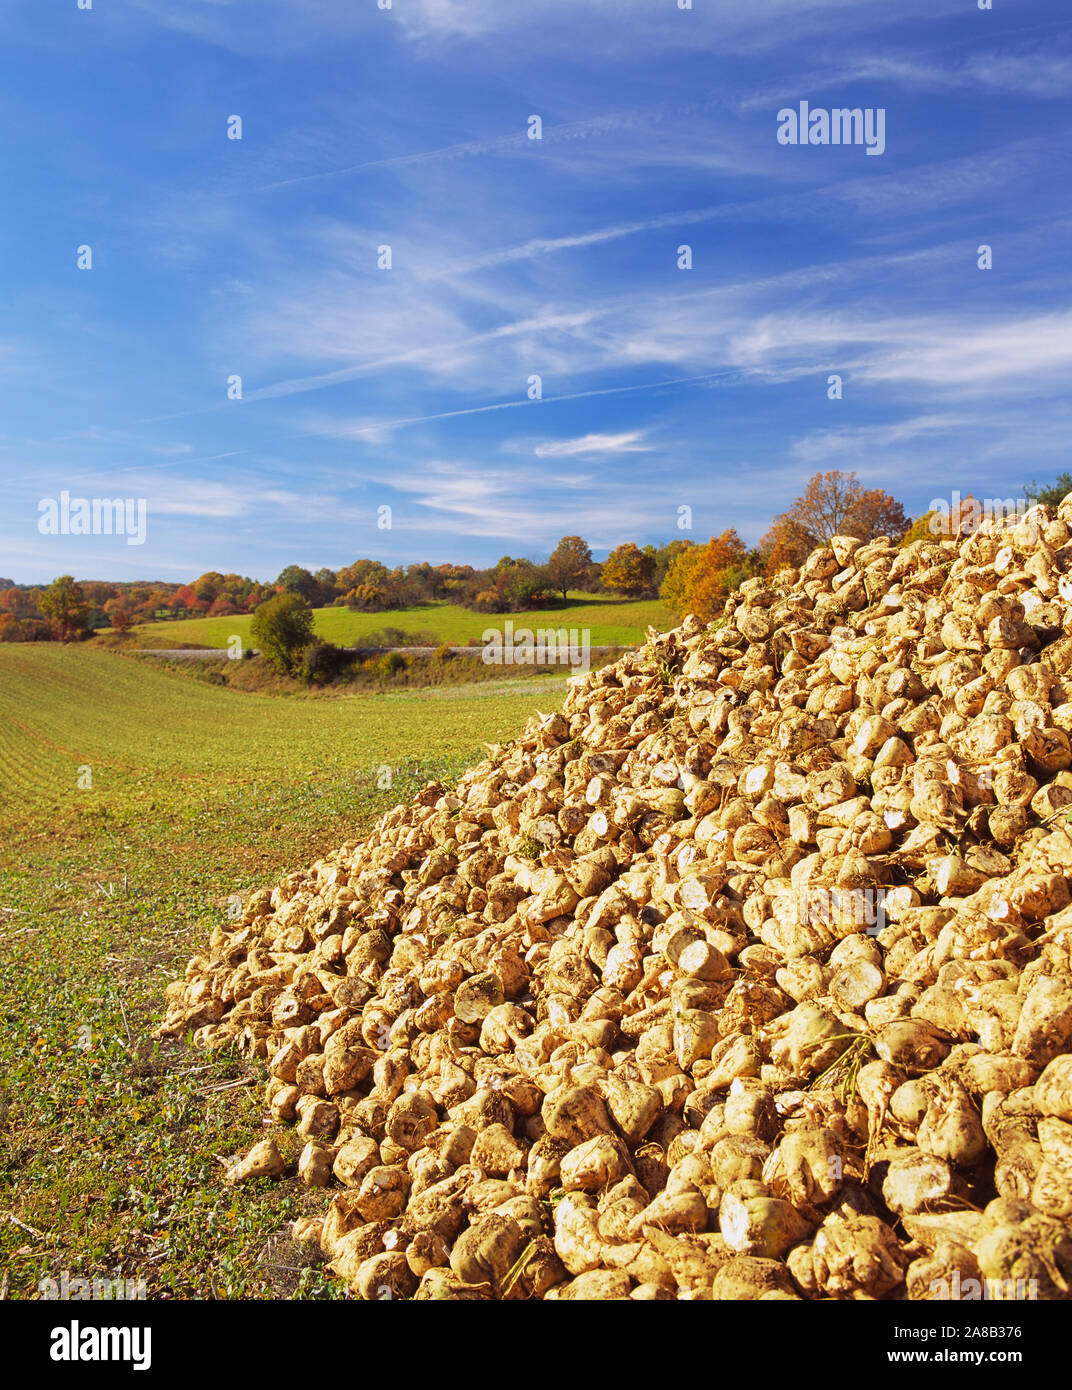 Heap of sugar beets in a field, Germany Stock Photo